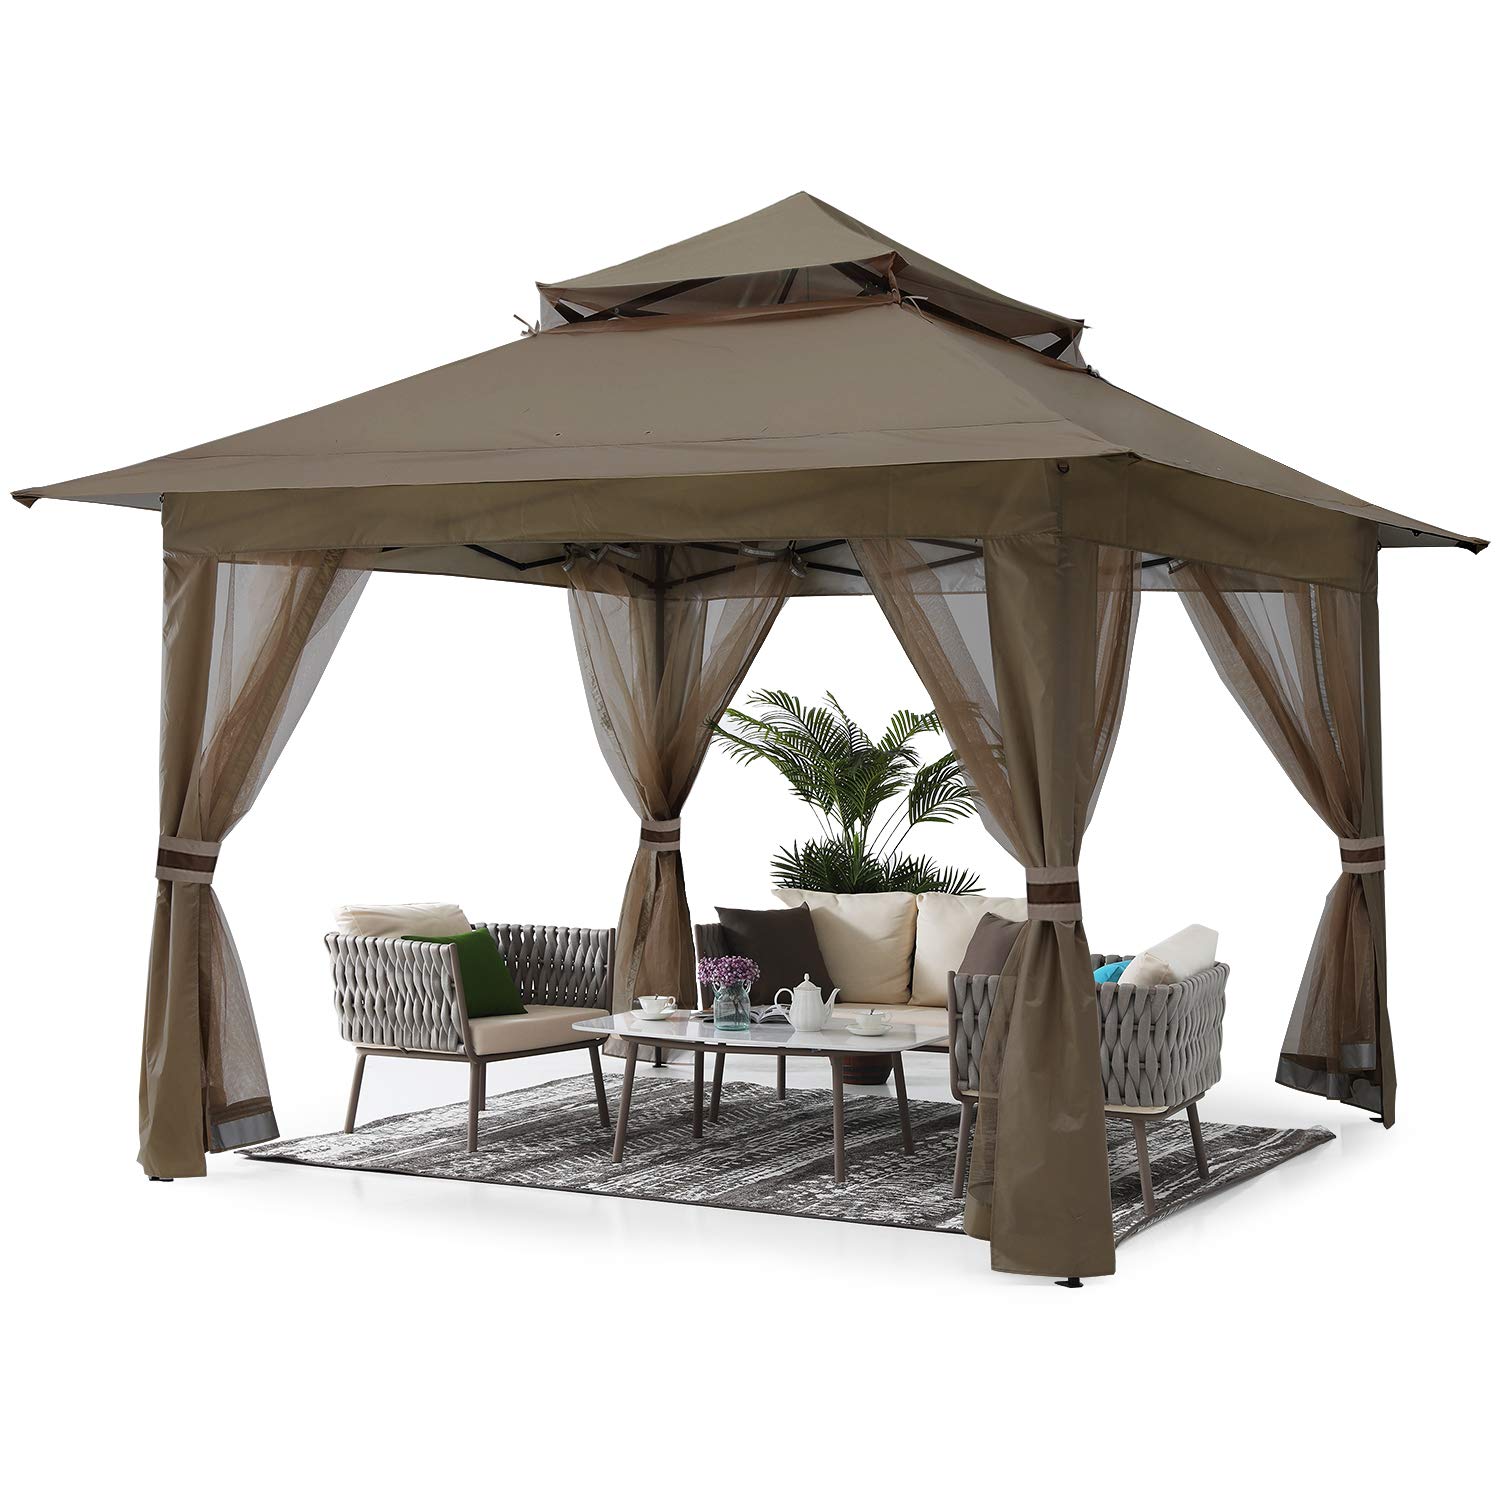 ABCCANOPY Pop Up Gazebo 13x13 - Outdoor Canopy Tent with Mosquito Netting for Patio Garden Backyard (Brown)